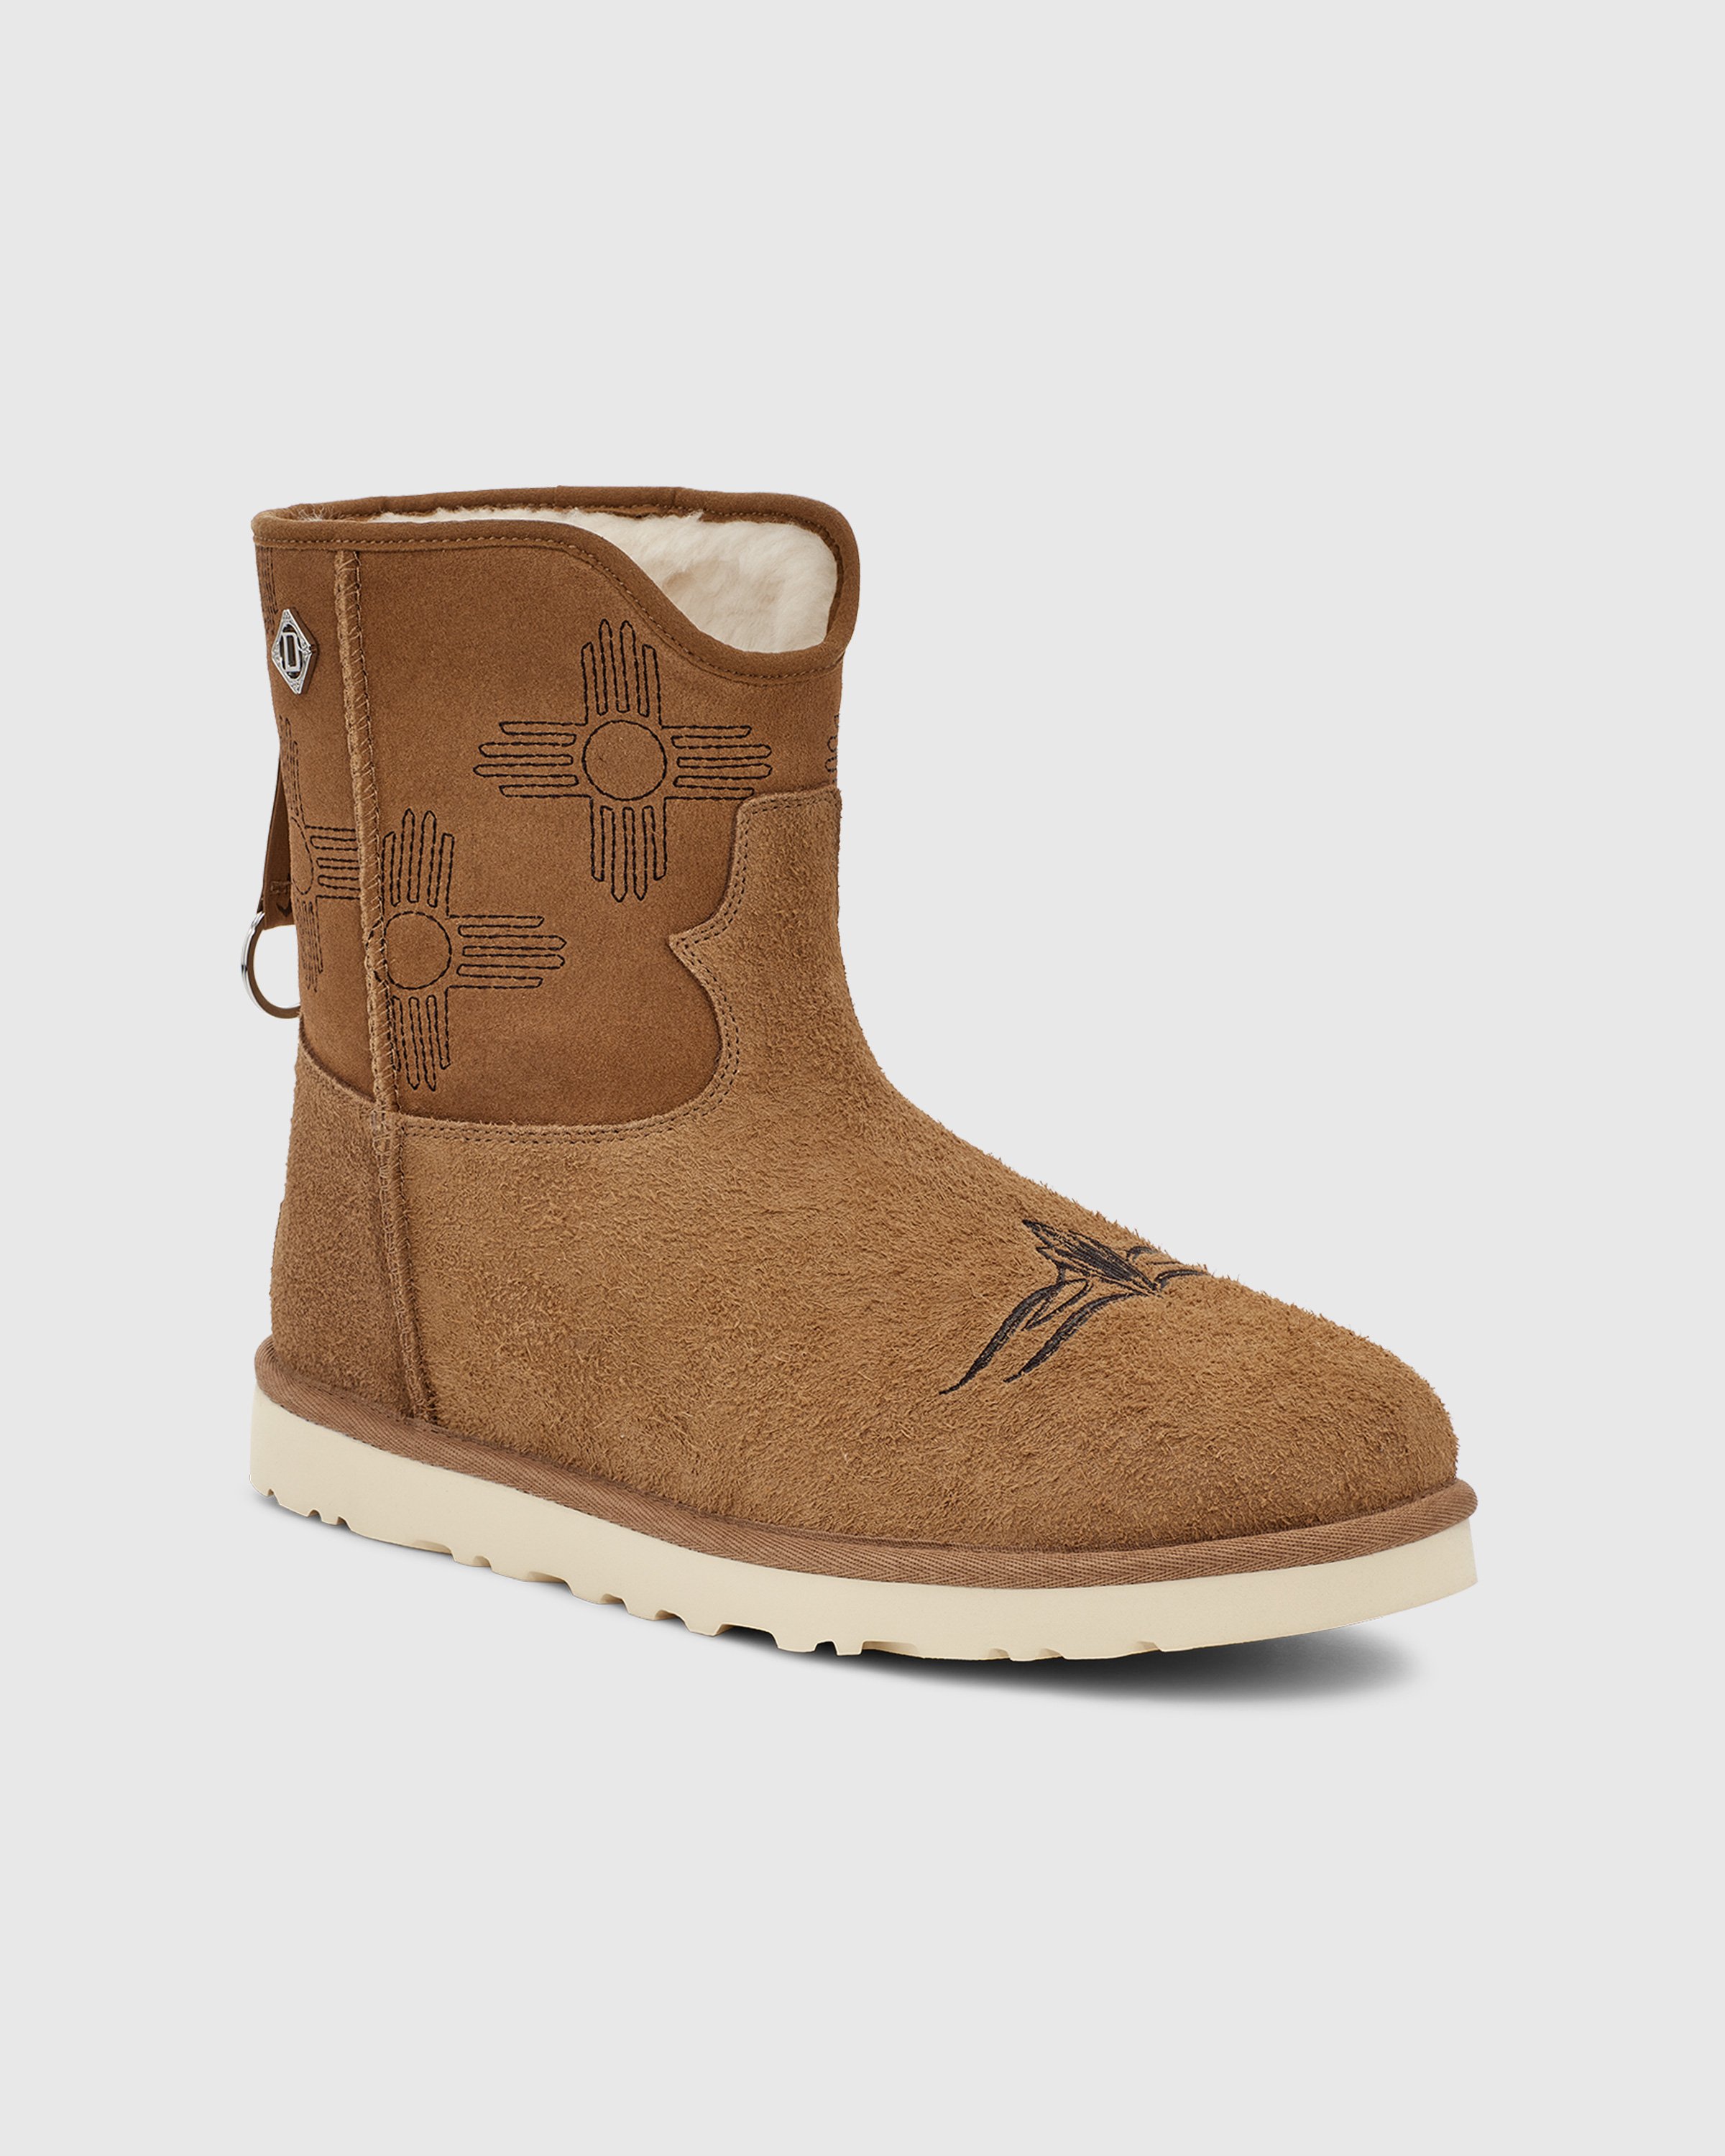 Ugg x Children of the Discordance - Classic Short Boot Brown - Footwear - Brown - Image 3